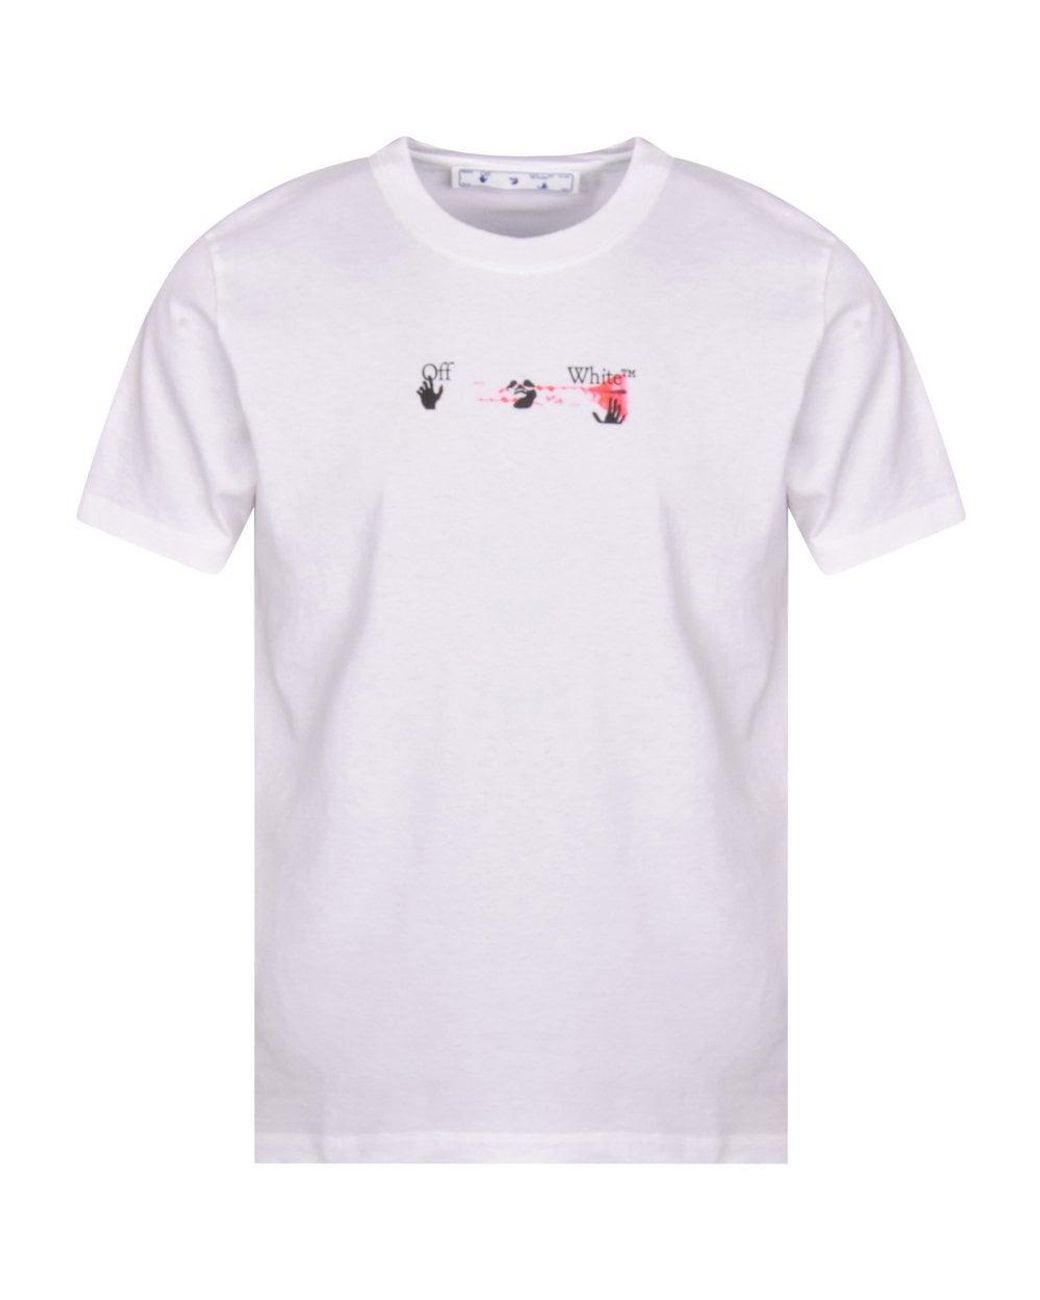 Virgil Abloh x ICA Pink Panther Off-White Tee / Shirt Sz M Louis Vuitton IN  HAND